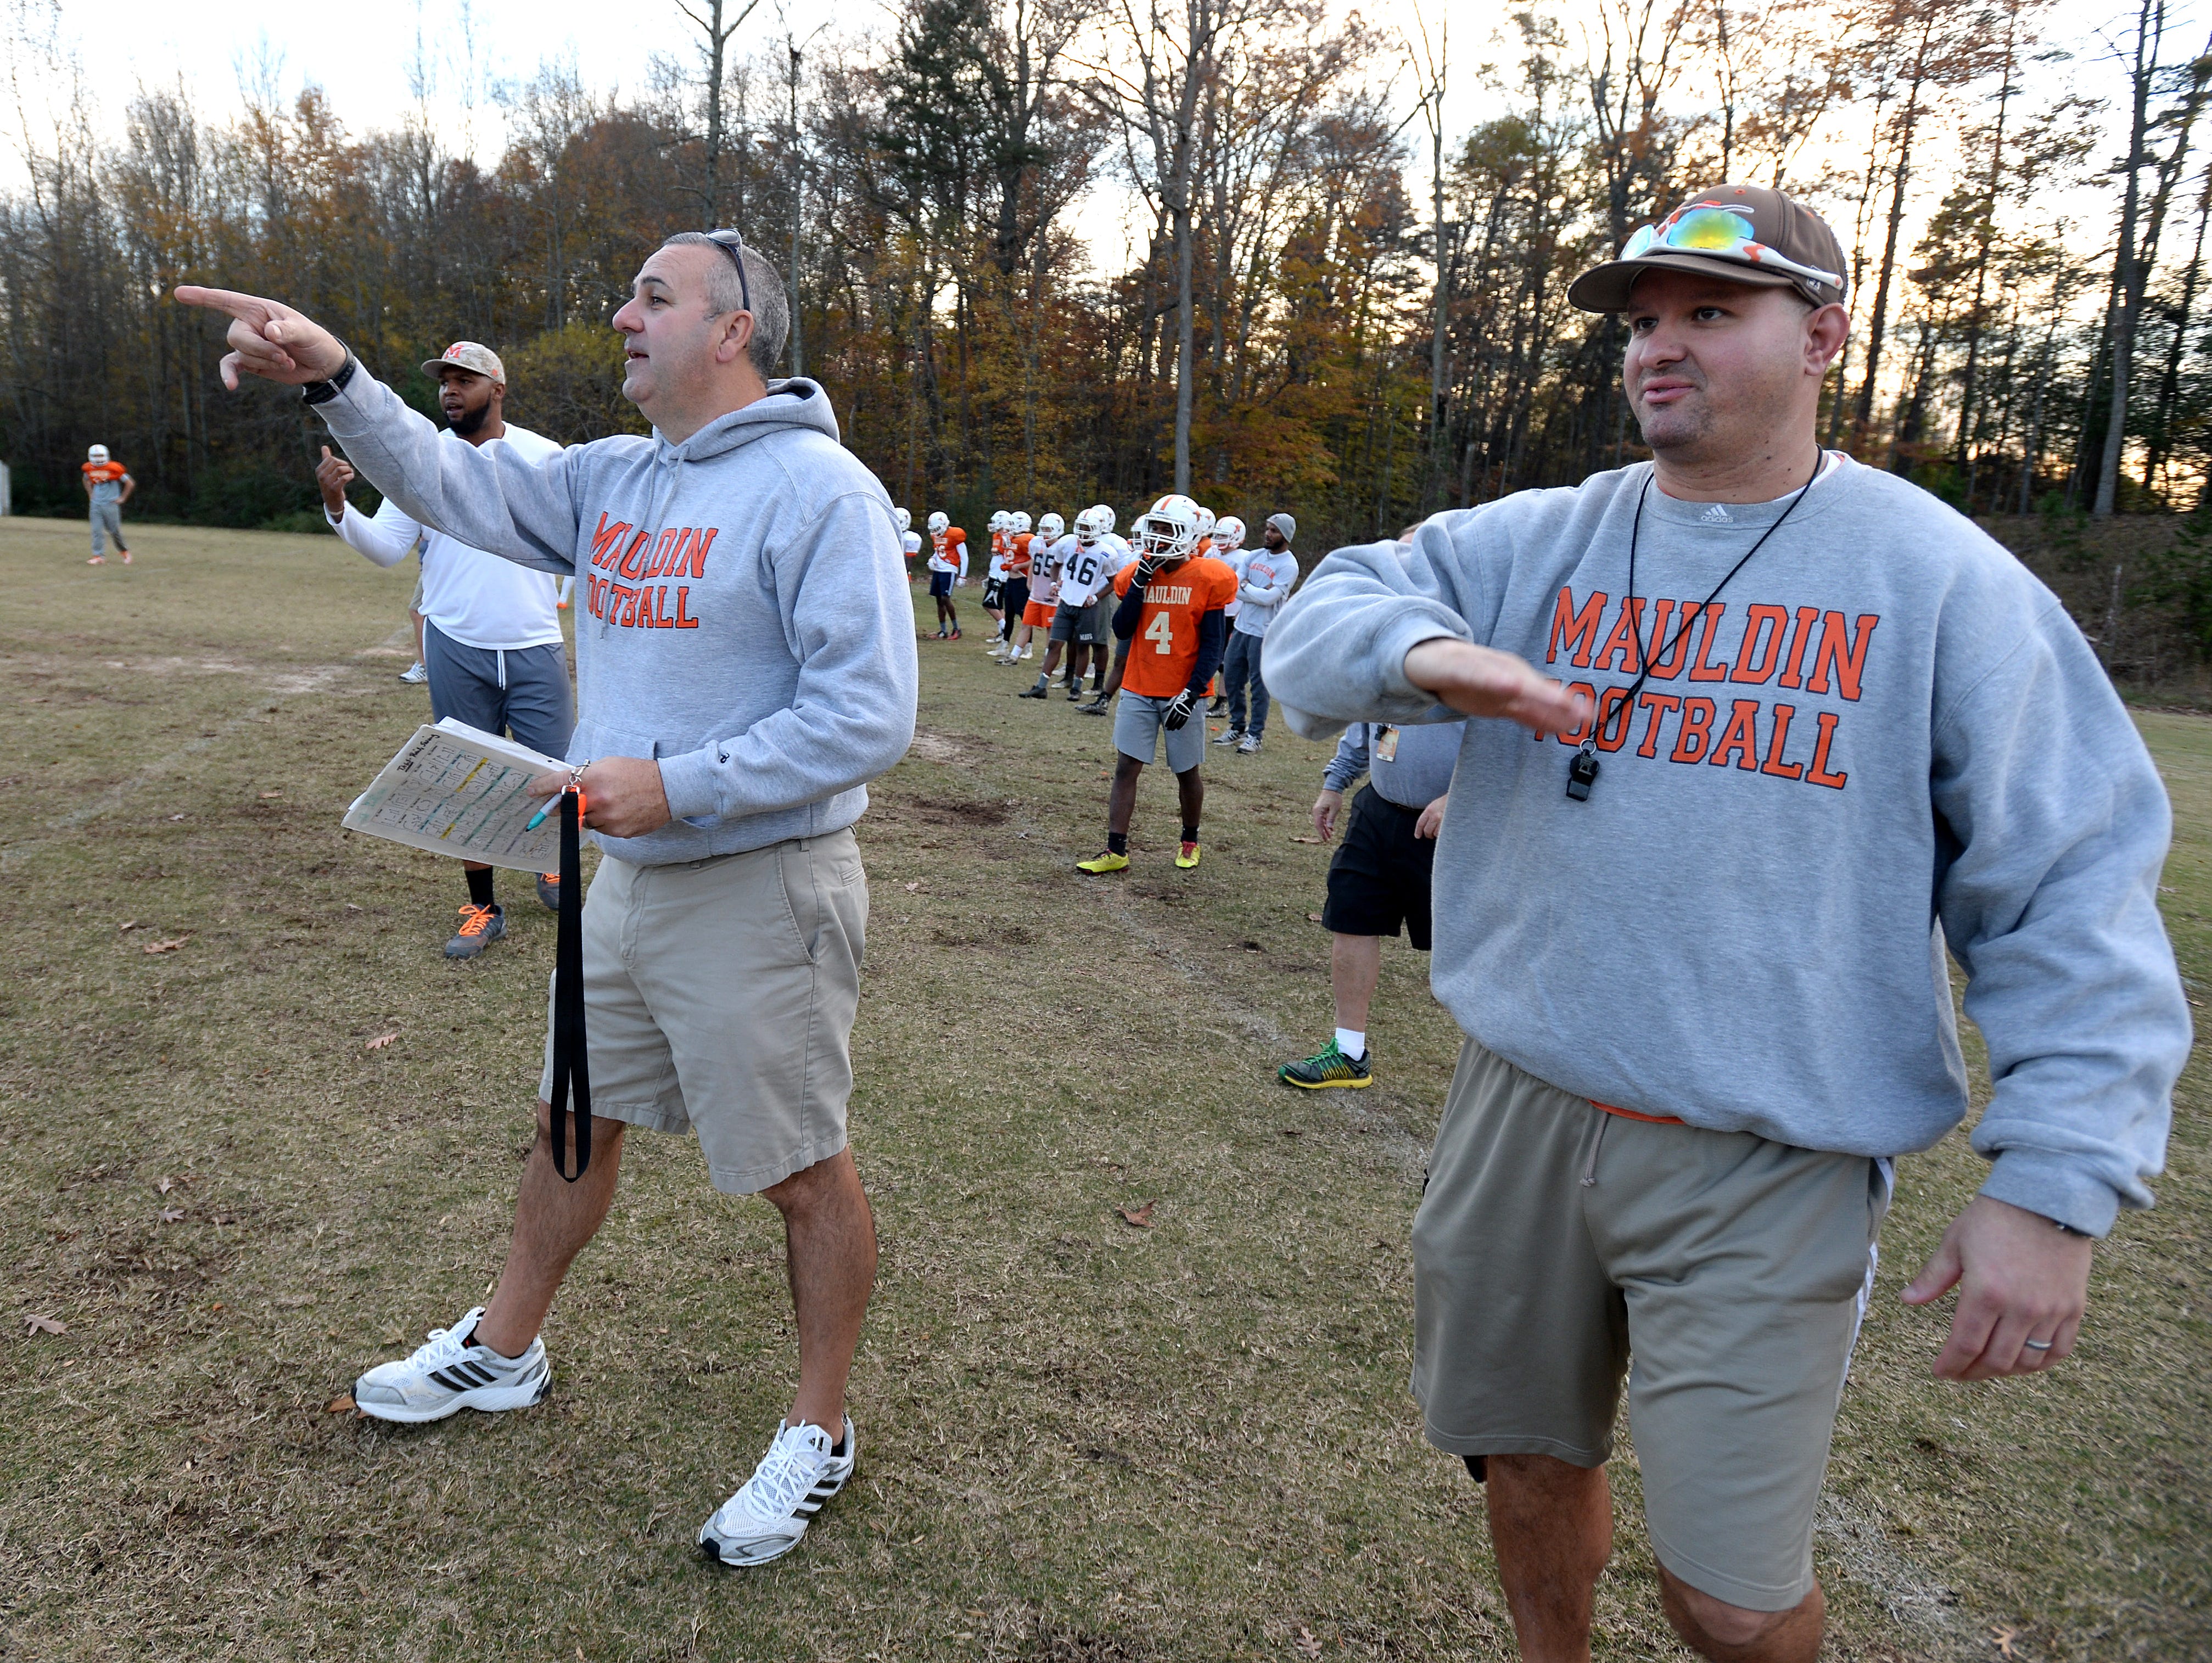 Mauldin head coach Lee Taylor, left, and assistant coach Brian Thompson call plays to the offense during the teams practice Monday, November 16, 2015. Mauldin will play Hillcrest in the 1st round of the AAAA playoffs Friday at Hillcrest.